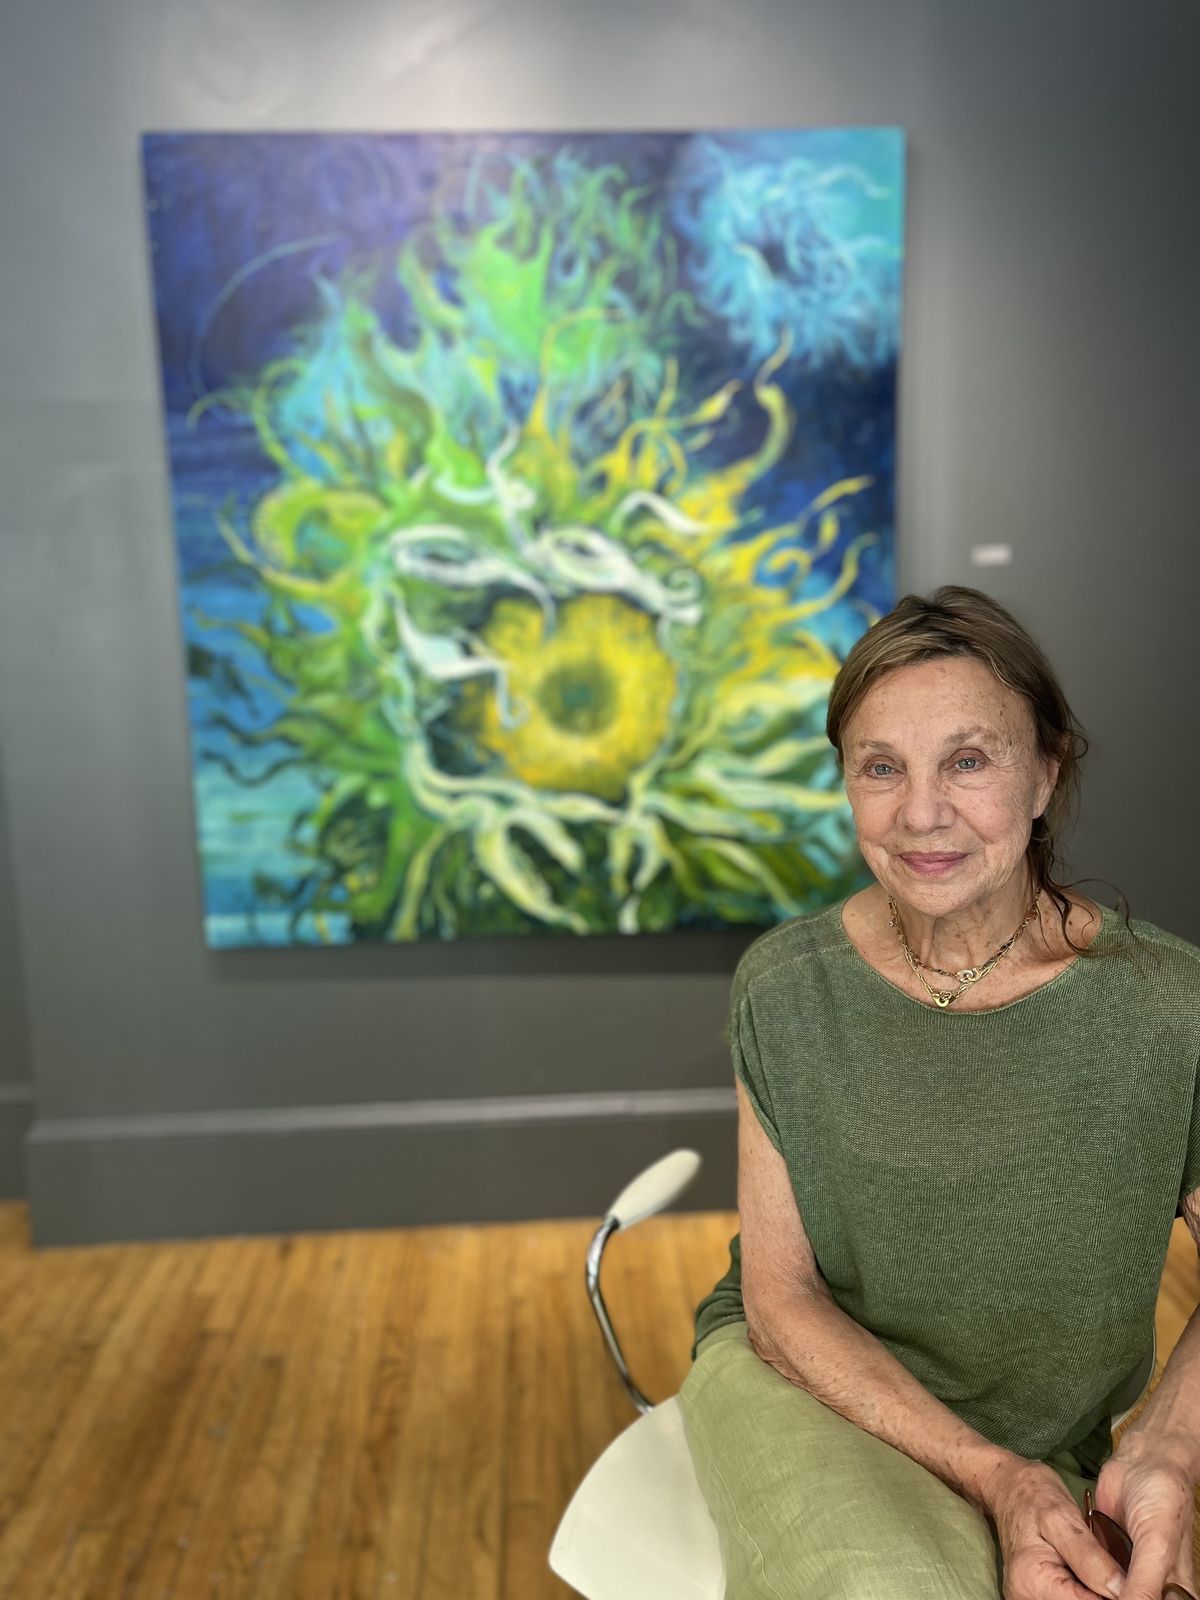 Finding the light: Jimmy Wright’s sunflowers at Argazzi Gallery